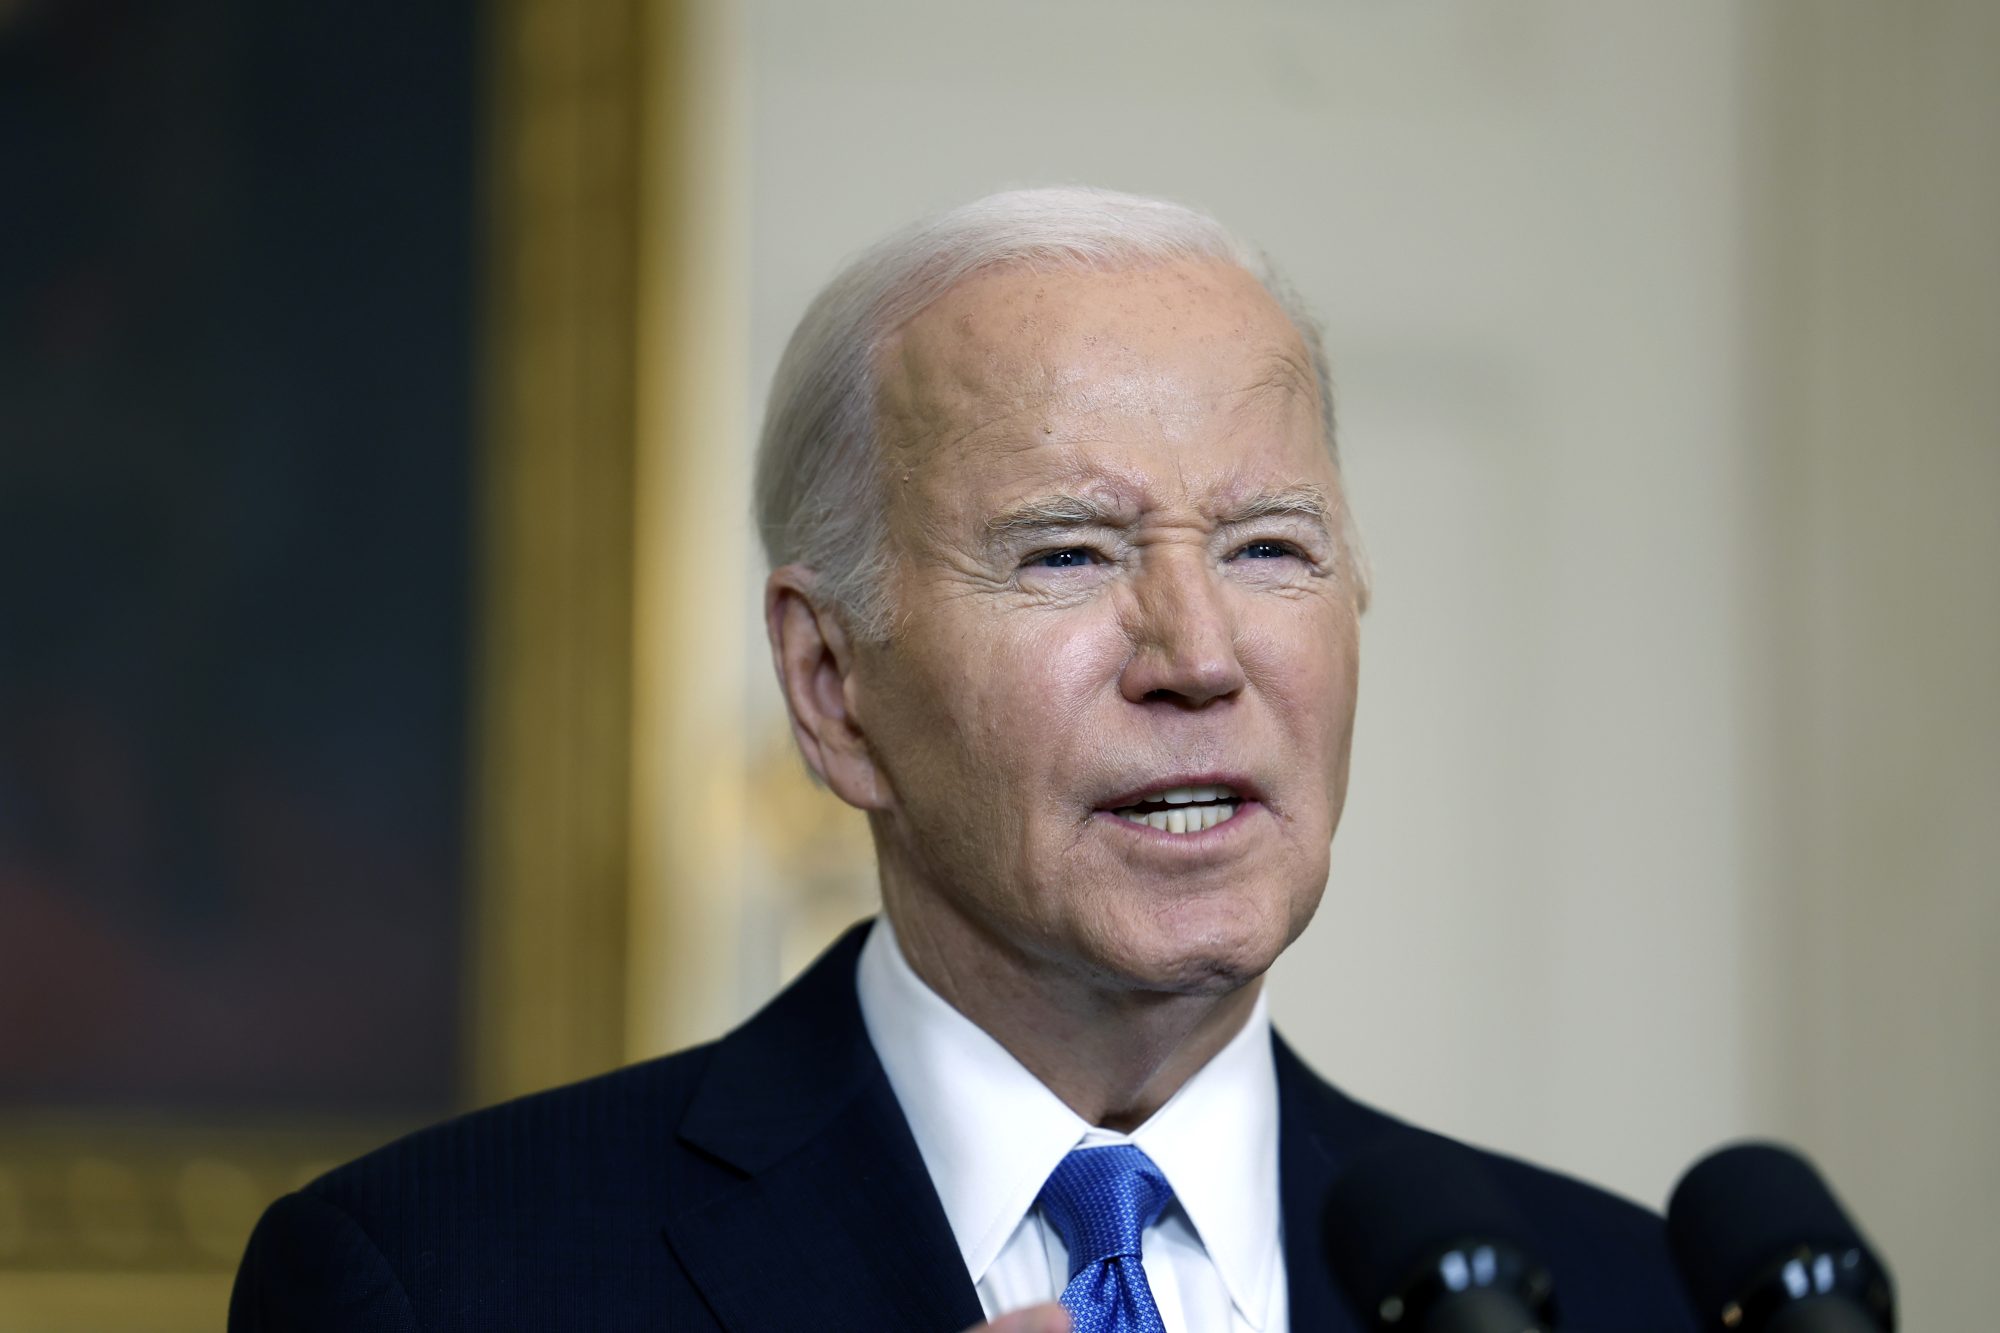 Robert Hur argues Biden is too old and forgetful to be held accountable for his actions.